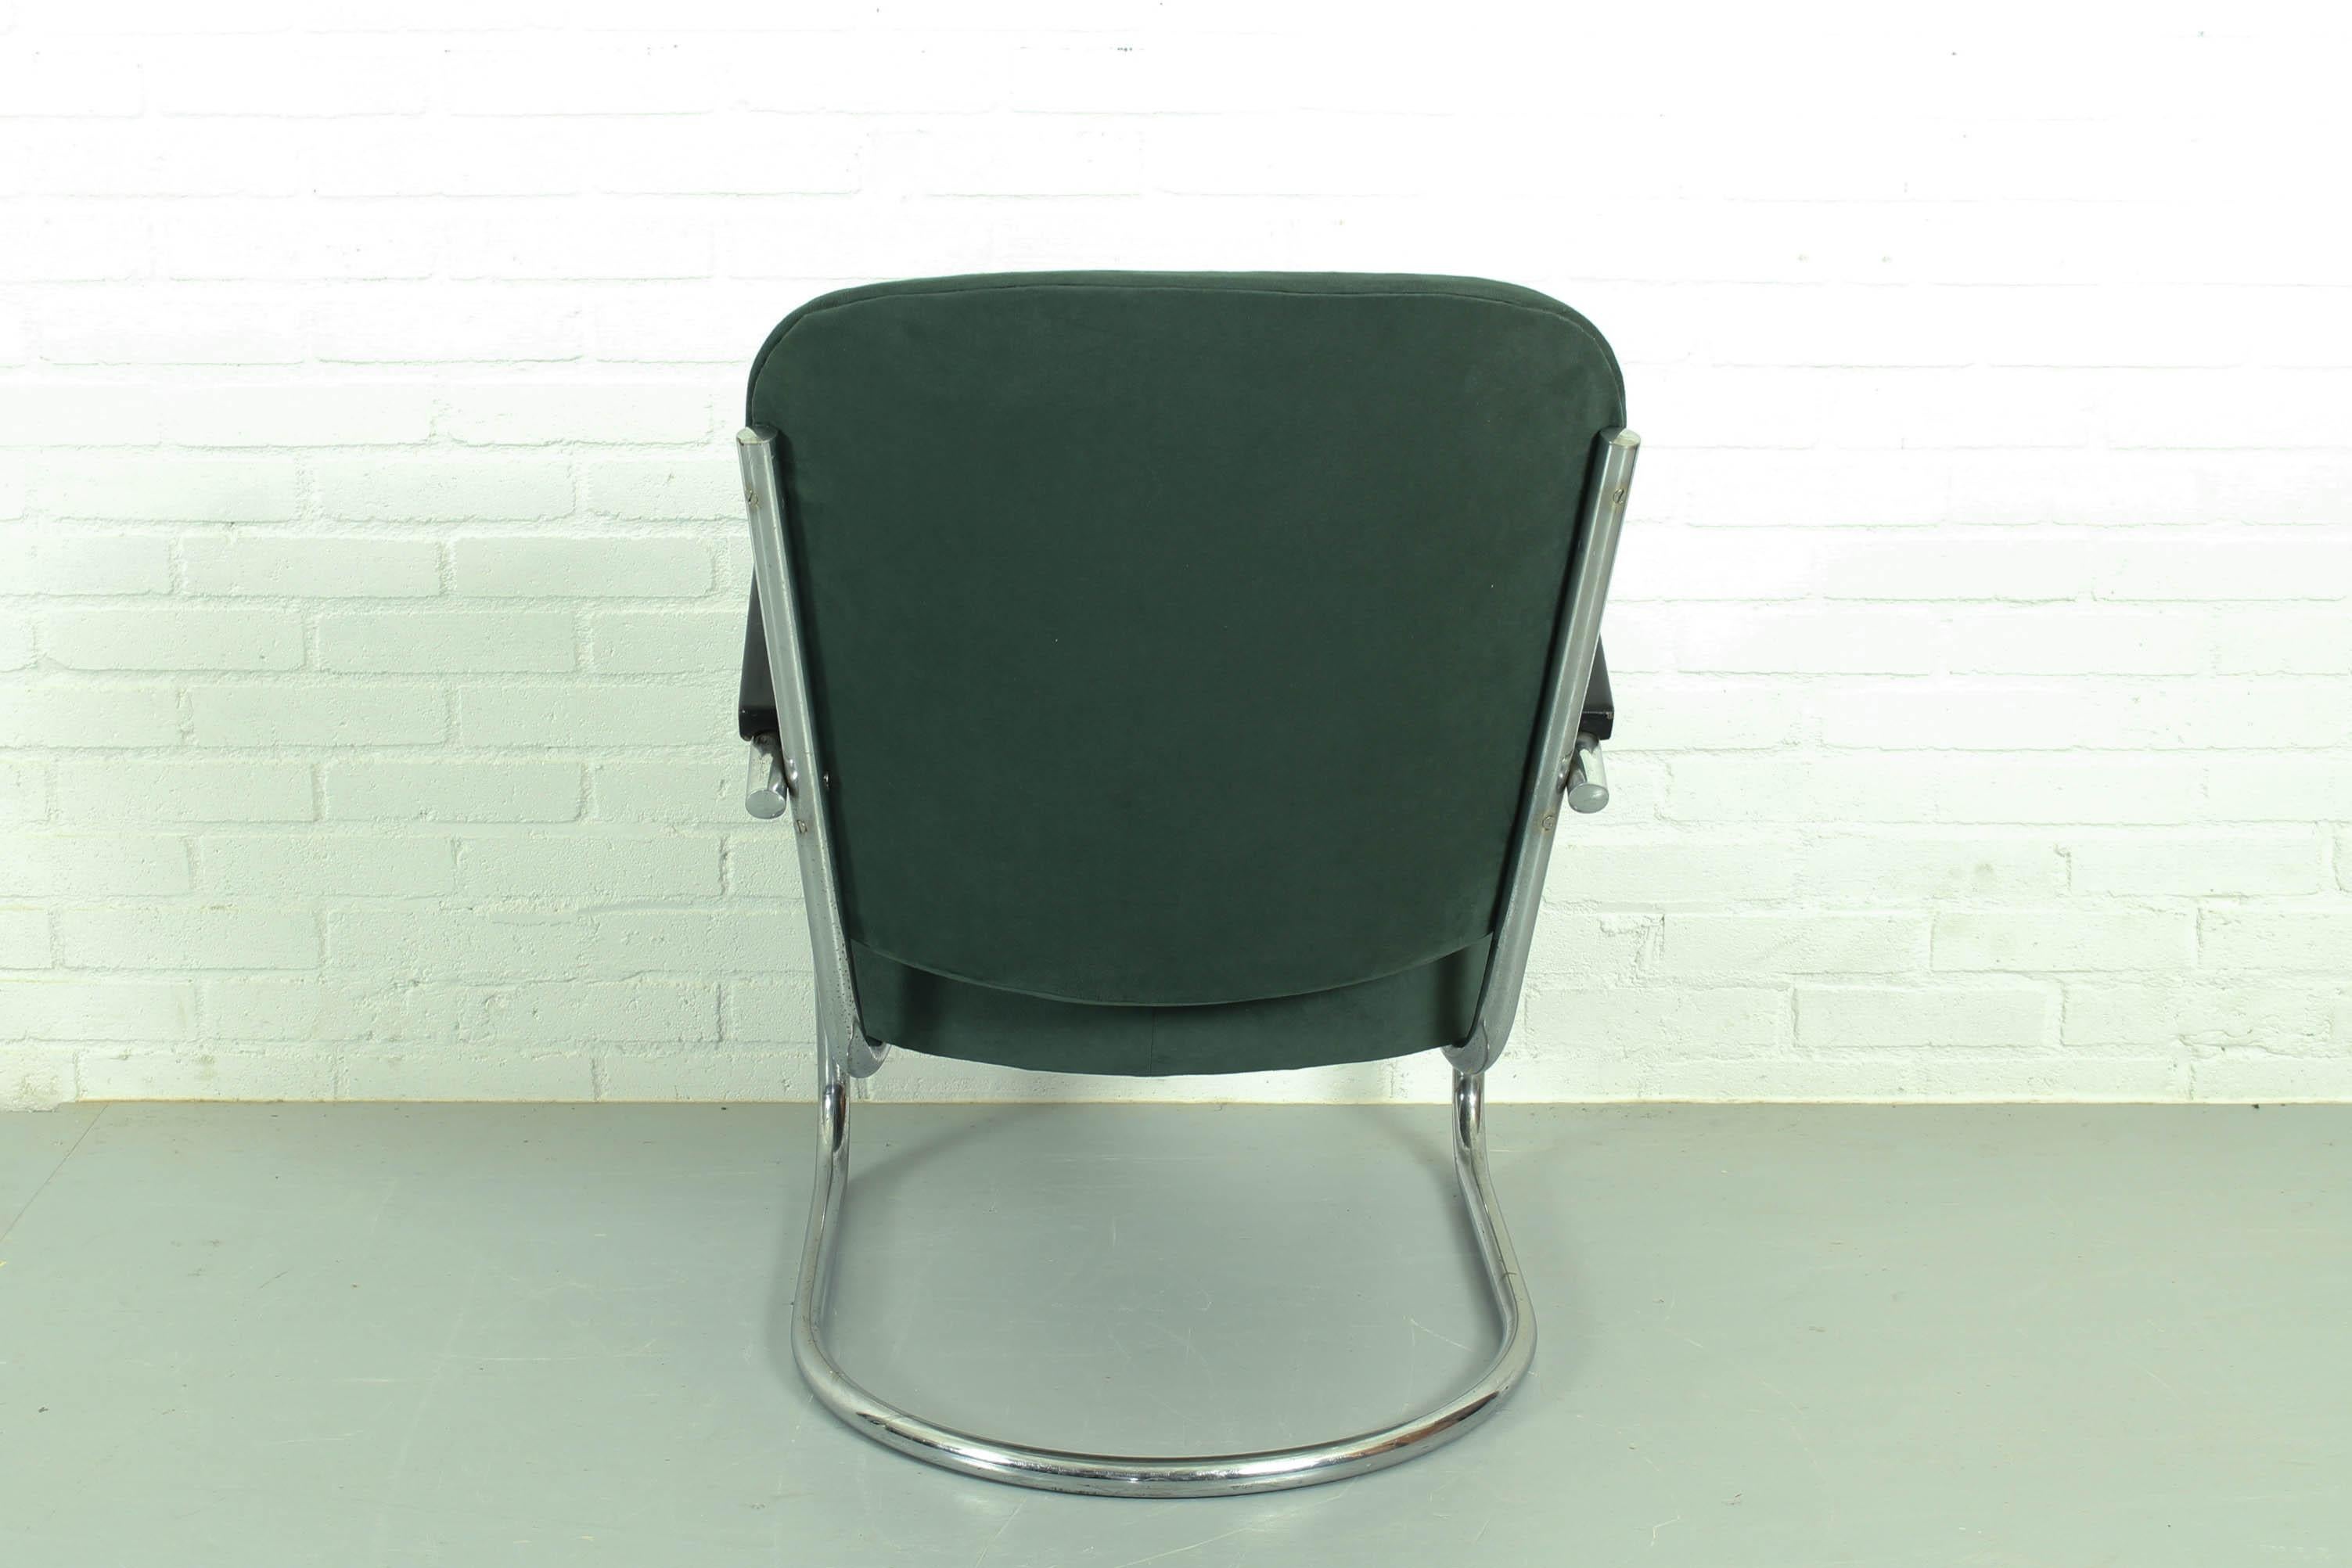 Model 436 Lounge Chair by Paul Schuitema For D3, 1930s In Good Condition For Sale In Appeltern, Gelderland